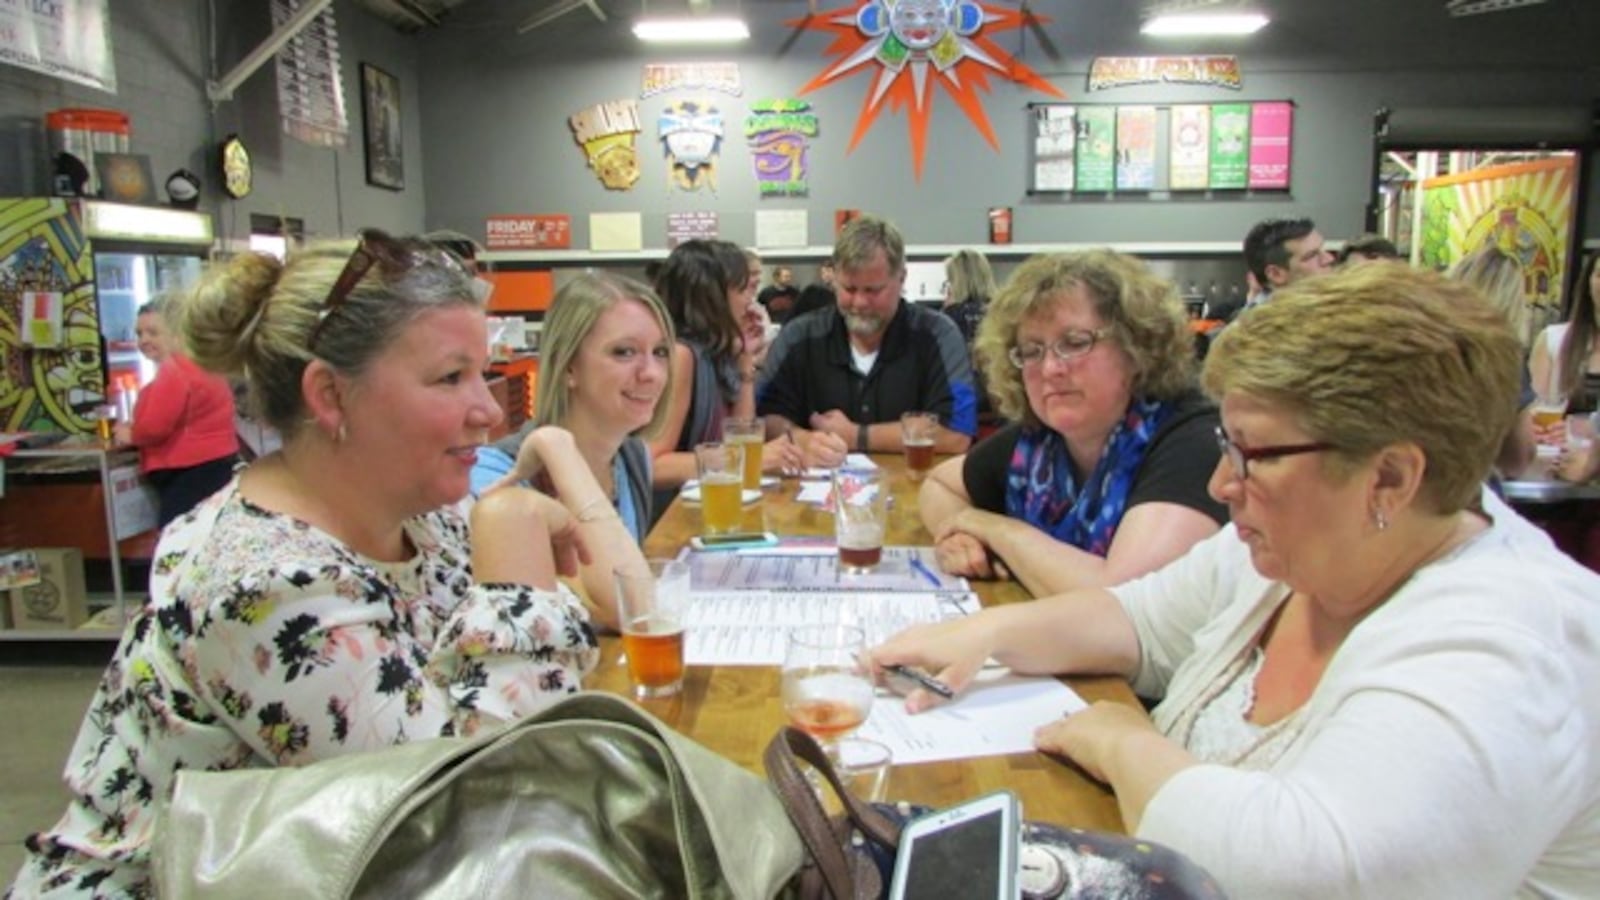 The team from IPS School 79 got the most right answers Moday at Education Trivia Night at Sun King Brewery sponsored by Chalkbeat and WFYI Public Media.